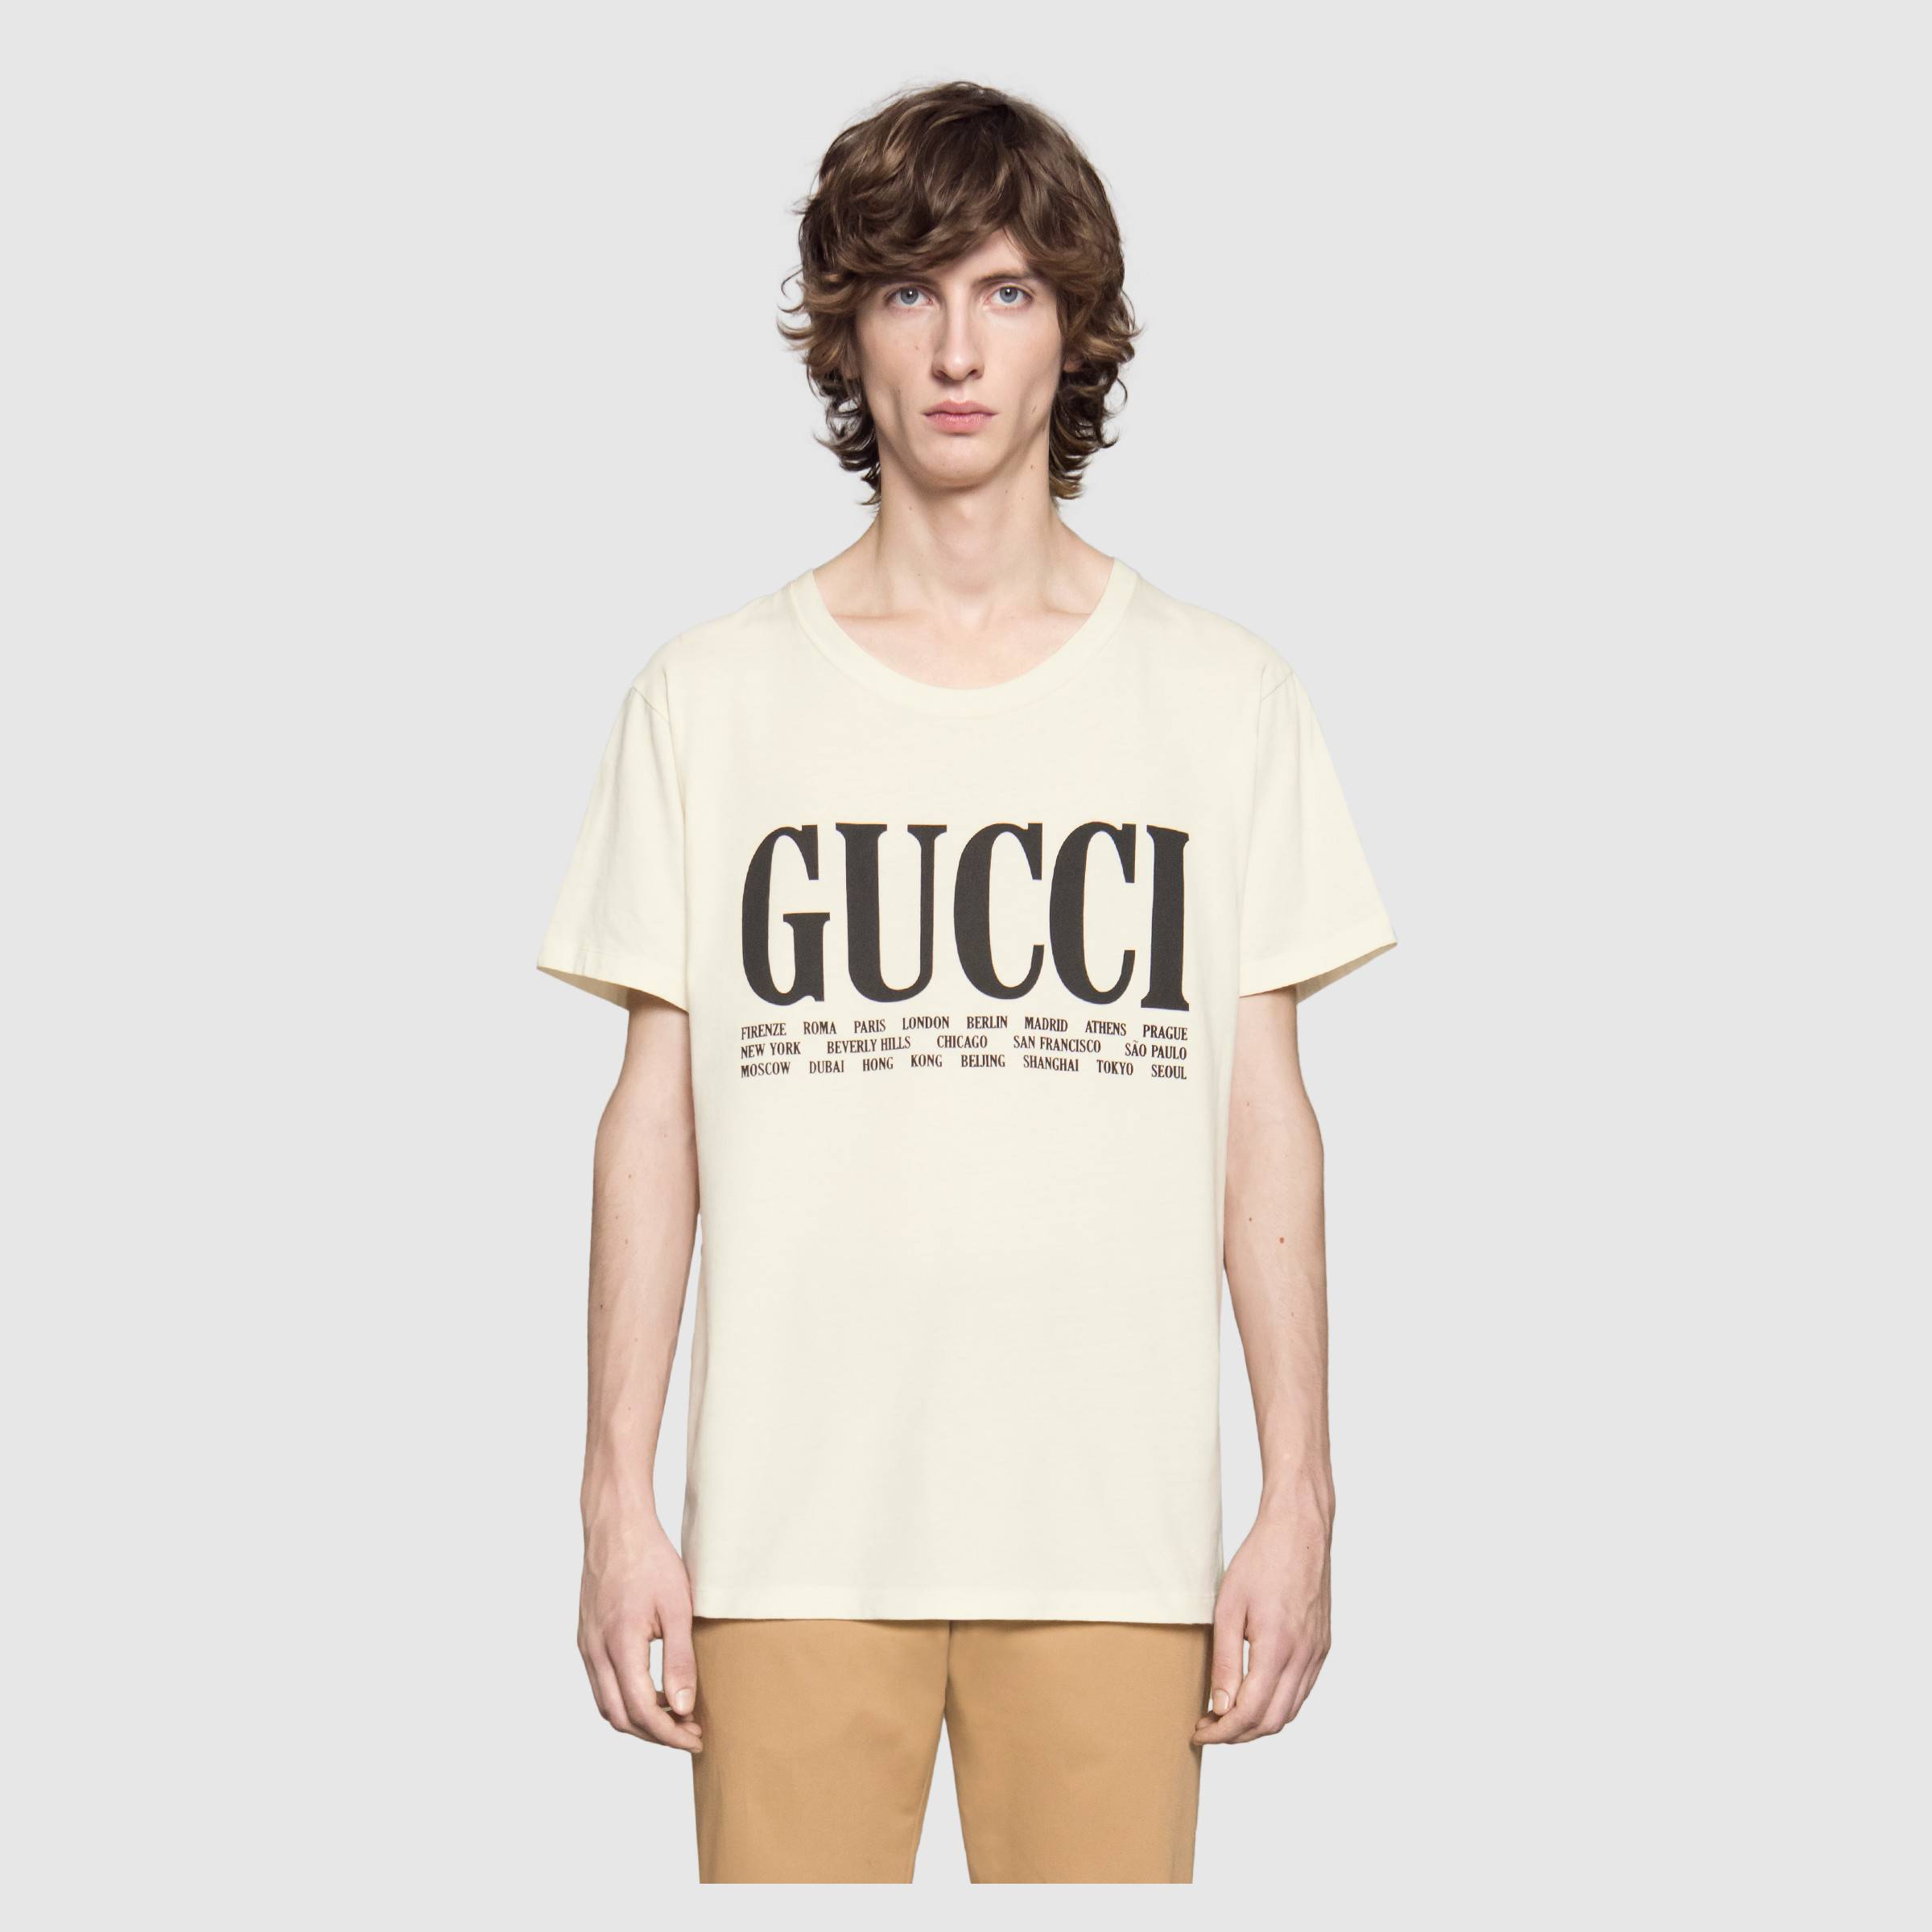 Gucci Launches New Spring/Summer 2018 – PAUSE Online | Men's Fashion, Street Style, Fashion News & Streetwear